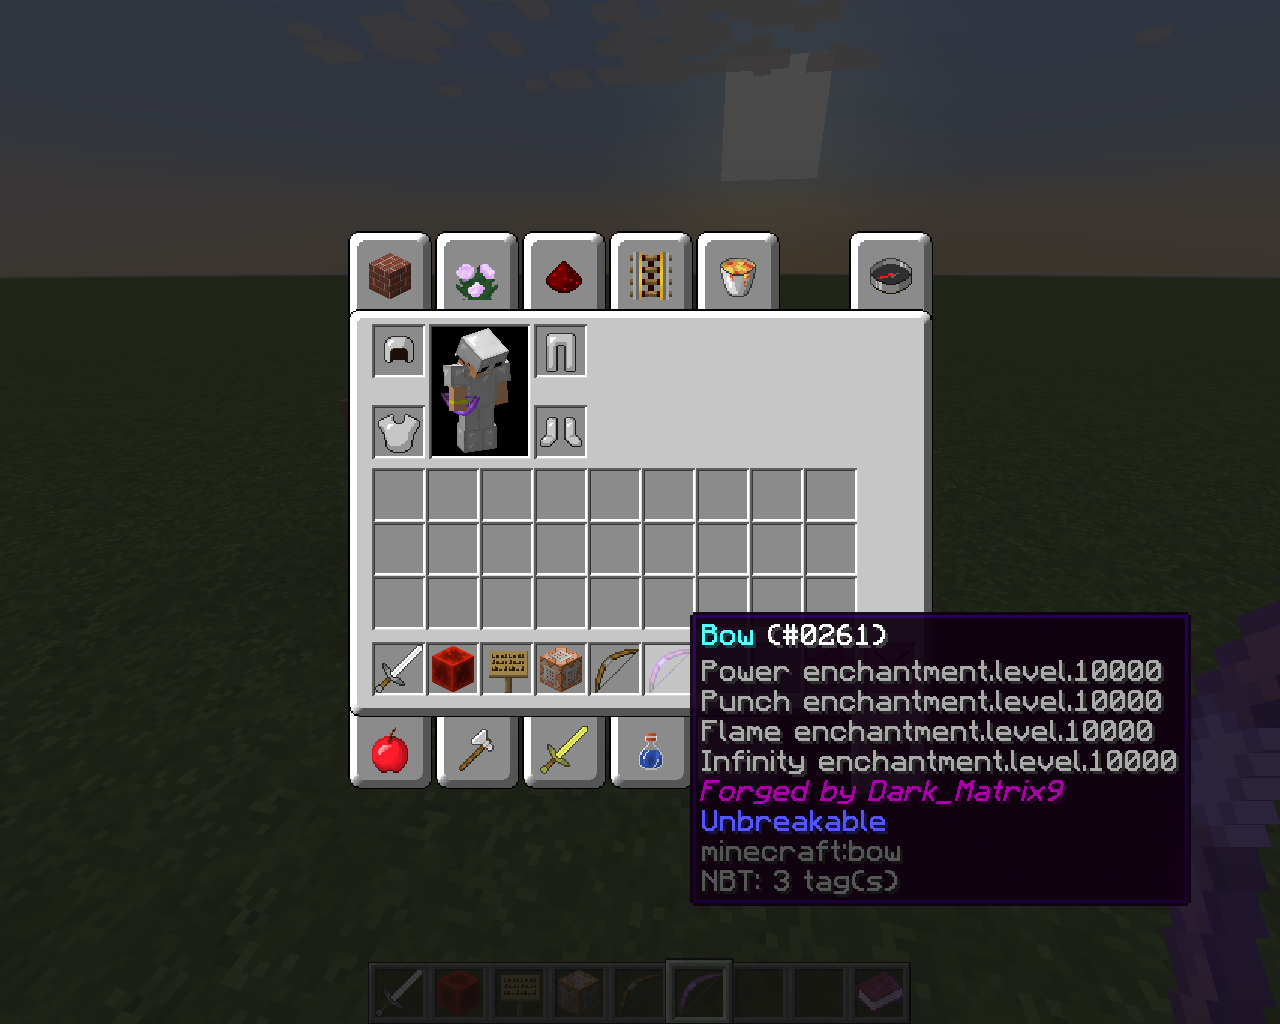 Minecraft Bow Command ./give multiple enchants